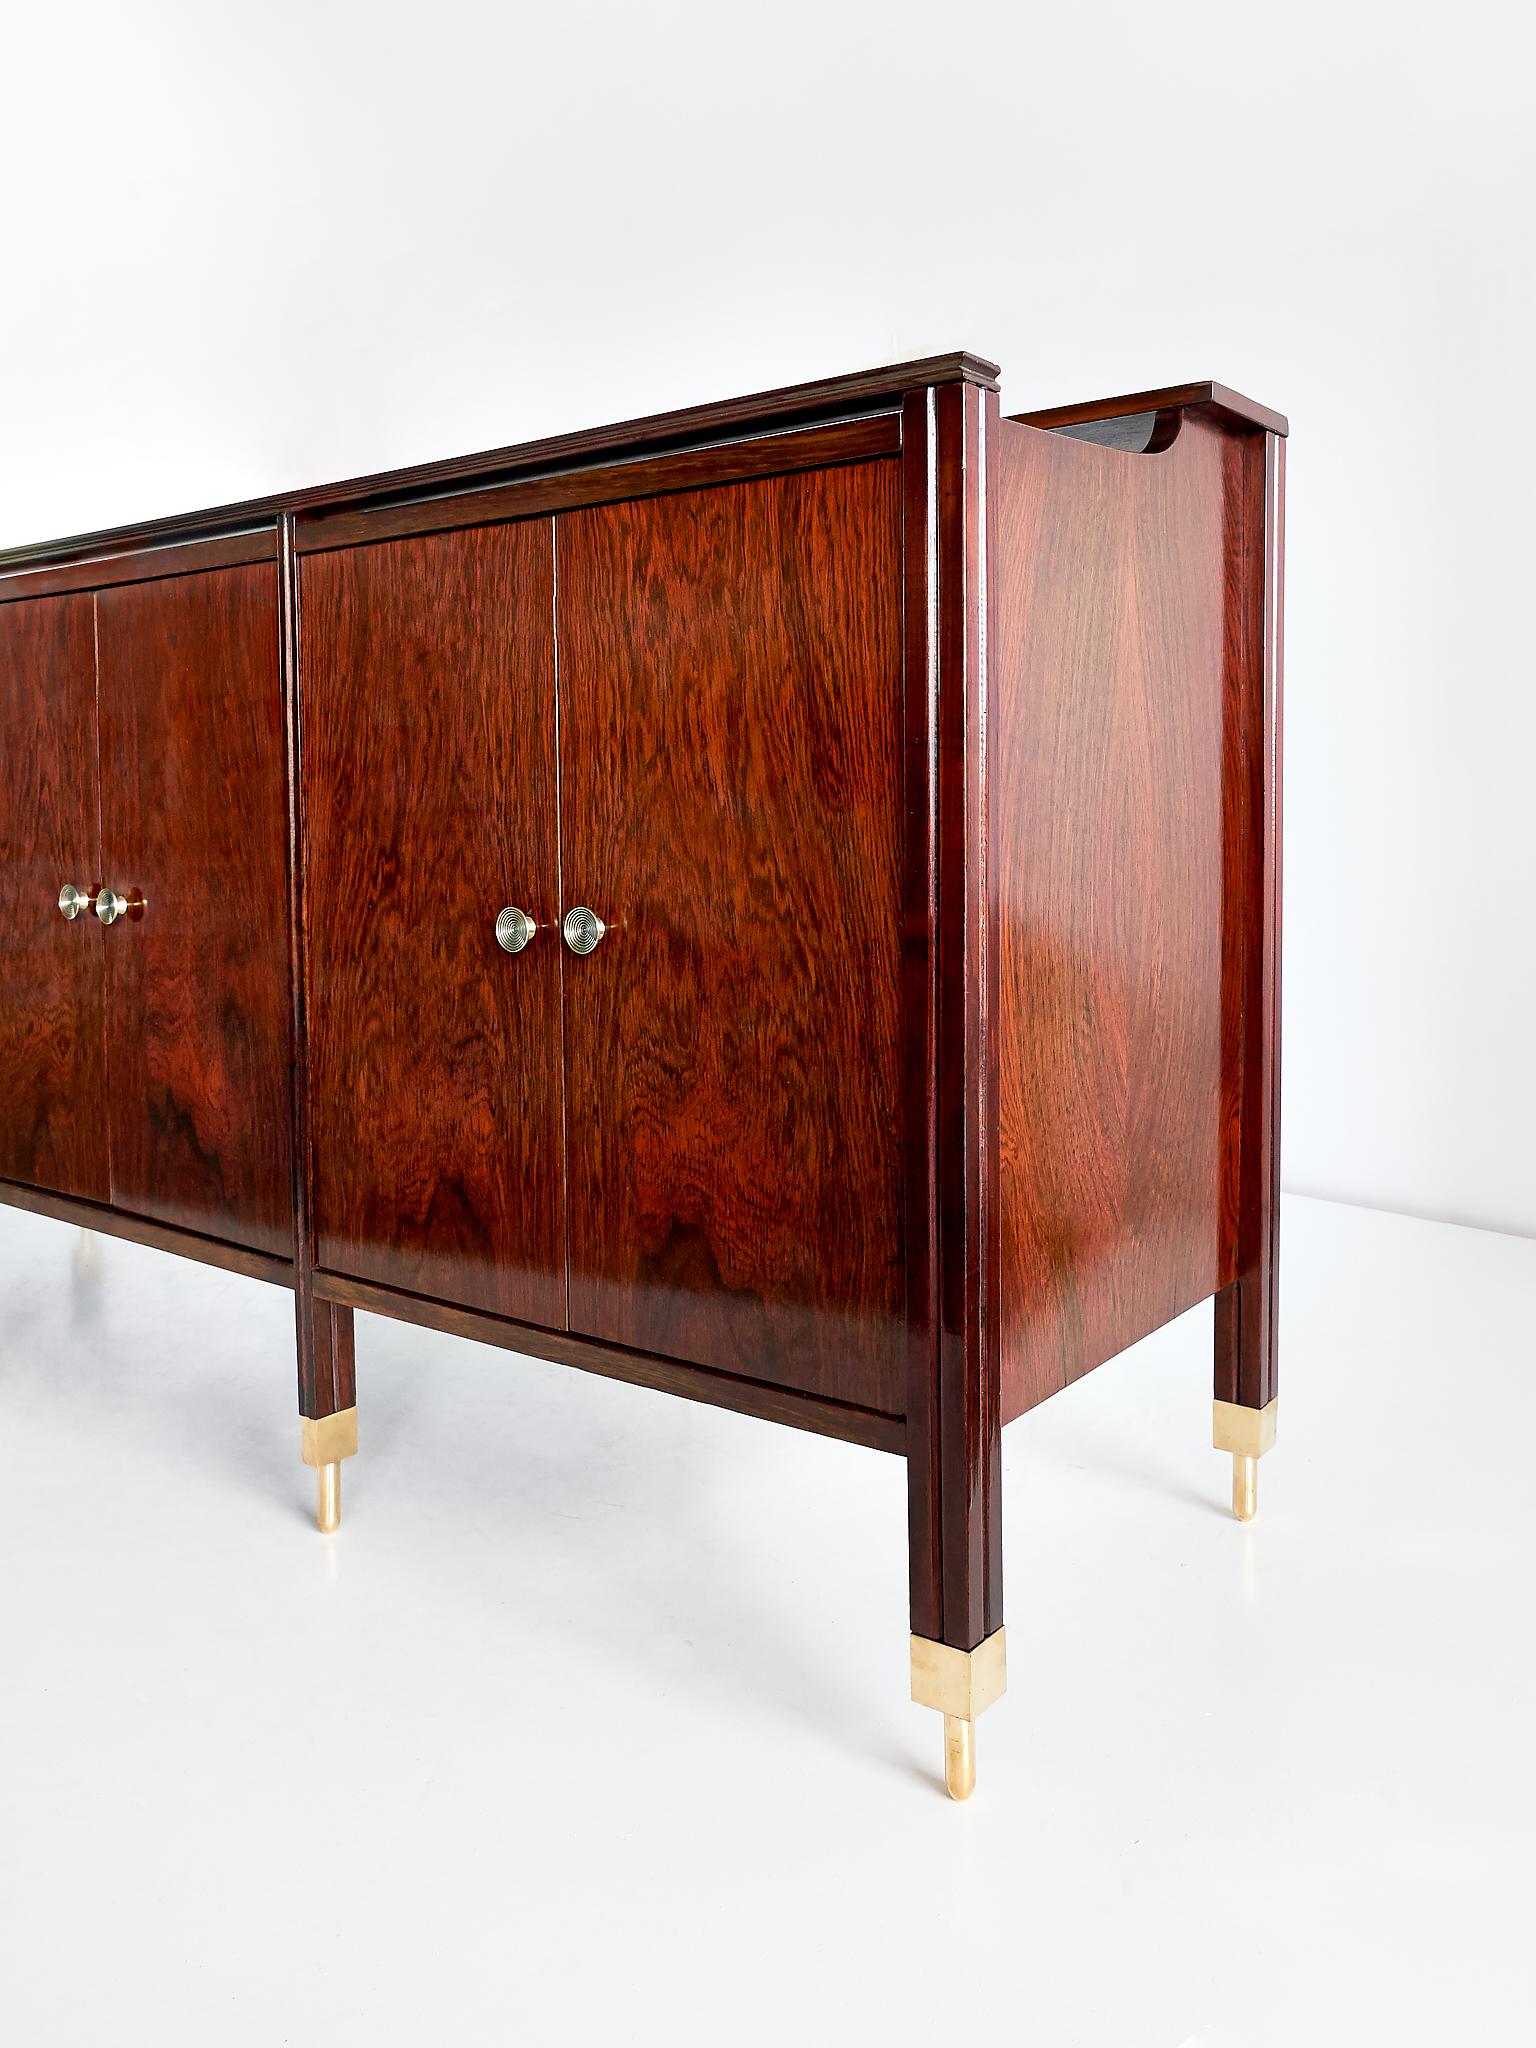 Mid-Century Modern Carlo de Carli Sideboard in Rosewood and Brass for Sormani, Italy, 1964 For Sale